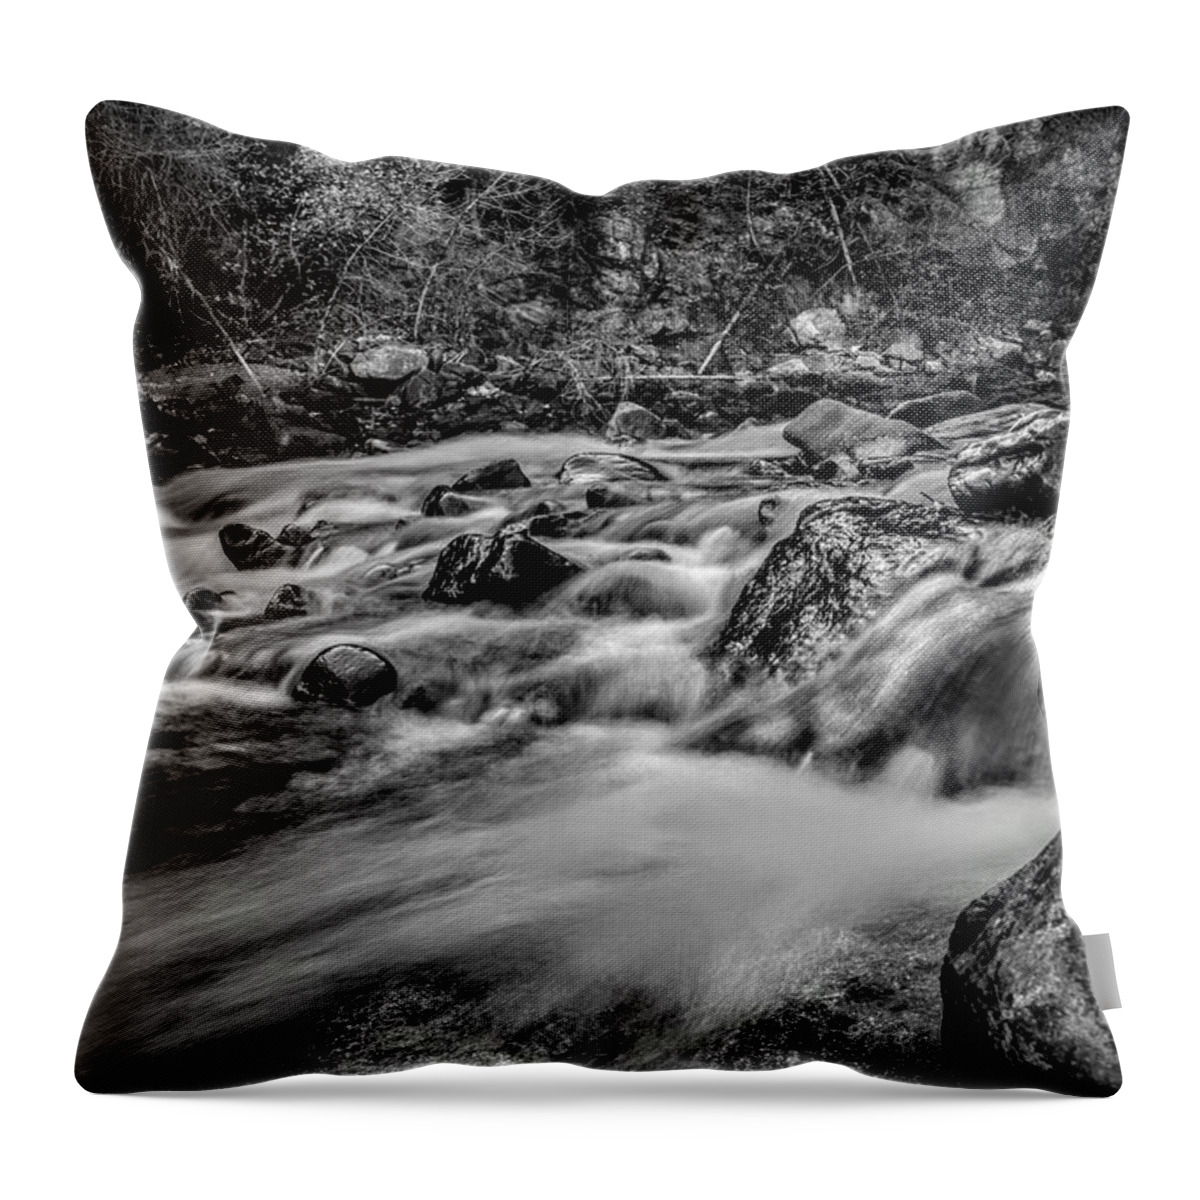 Stream Throw Pillow featuring the photograph Silky Stream by Michael Brungardt